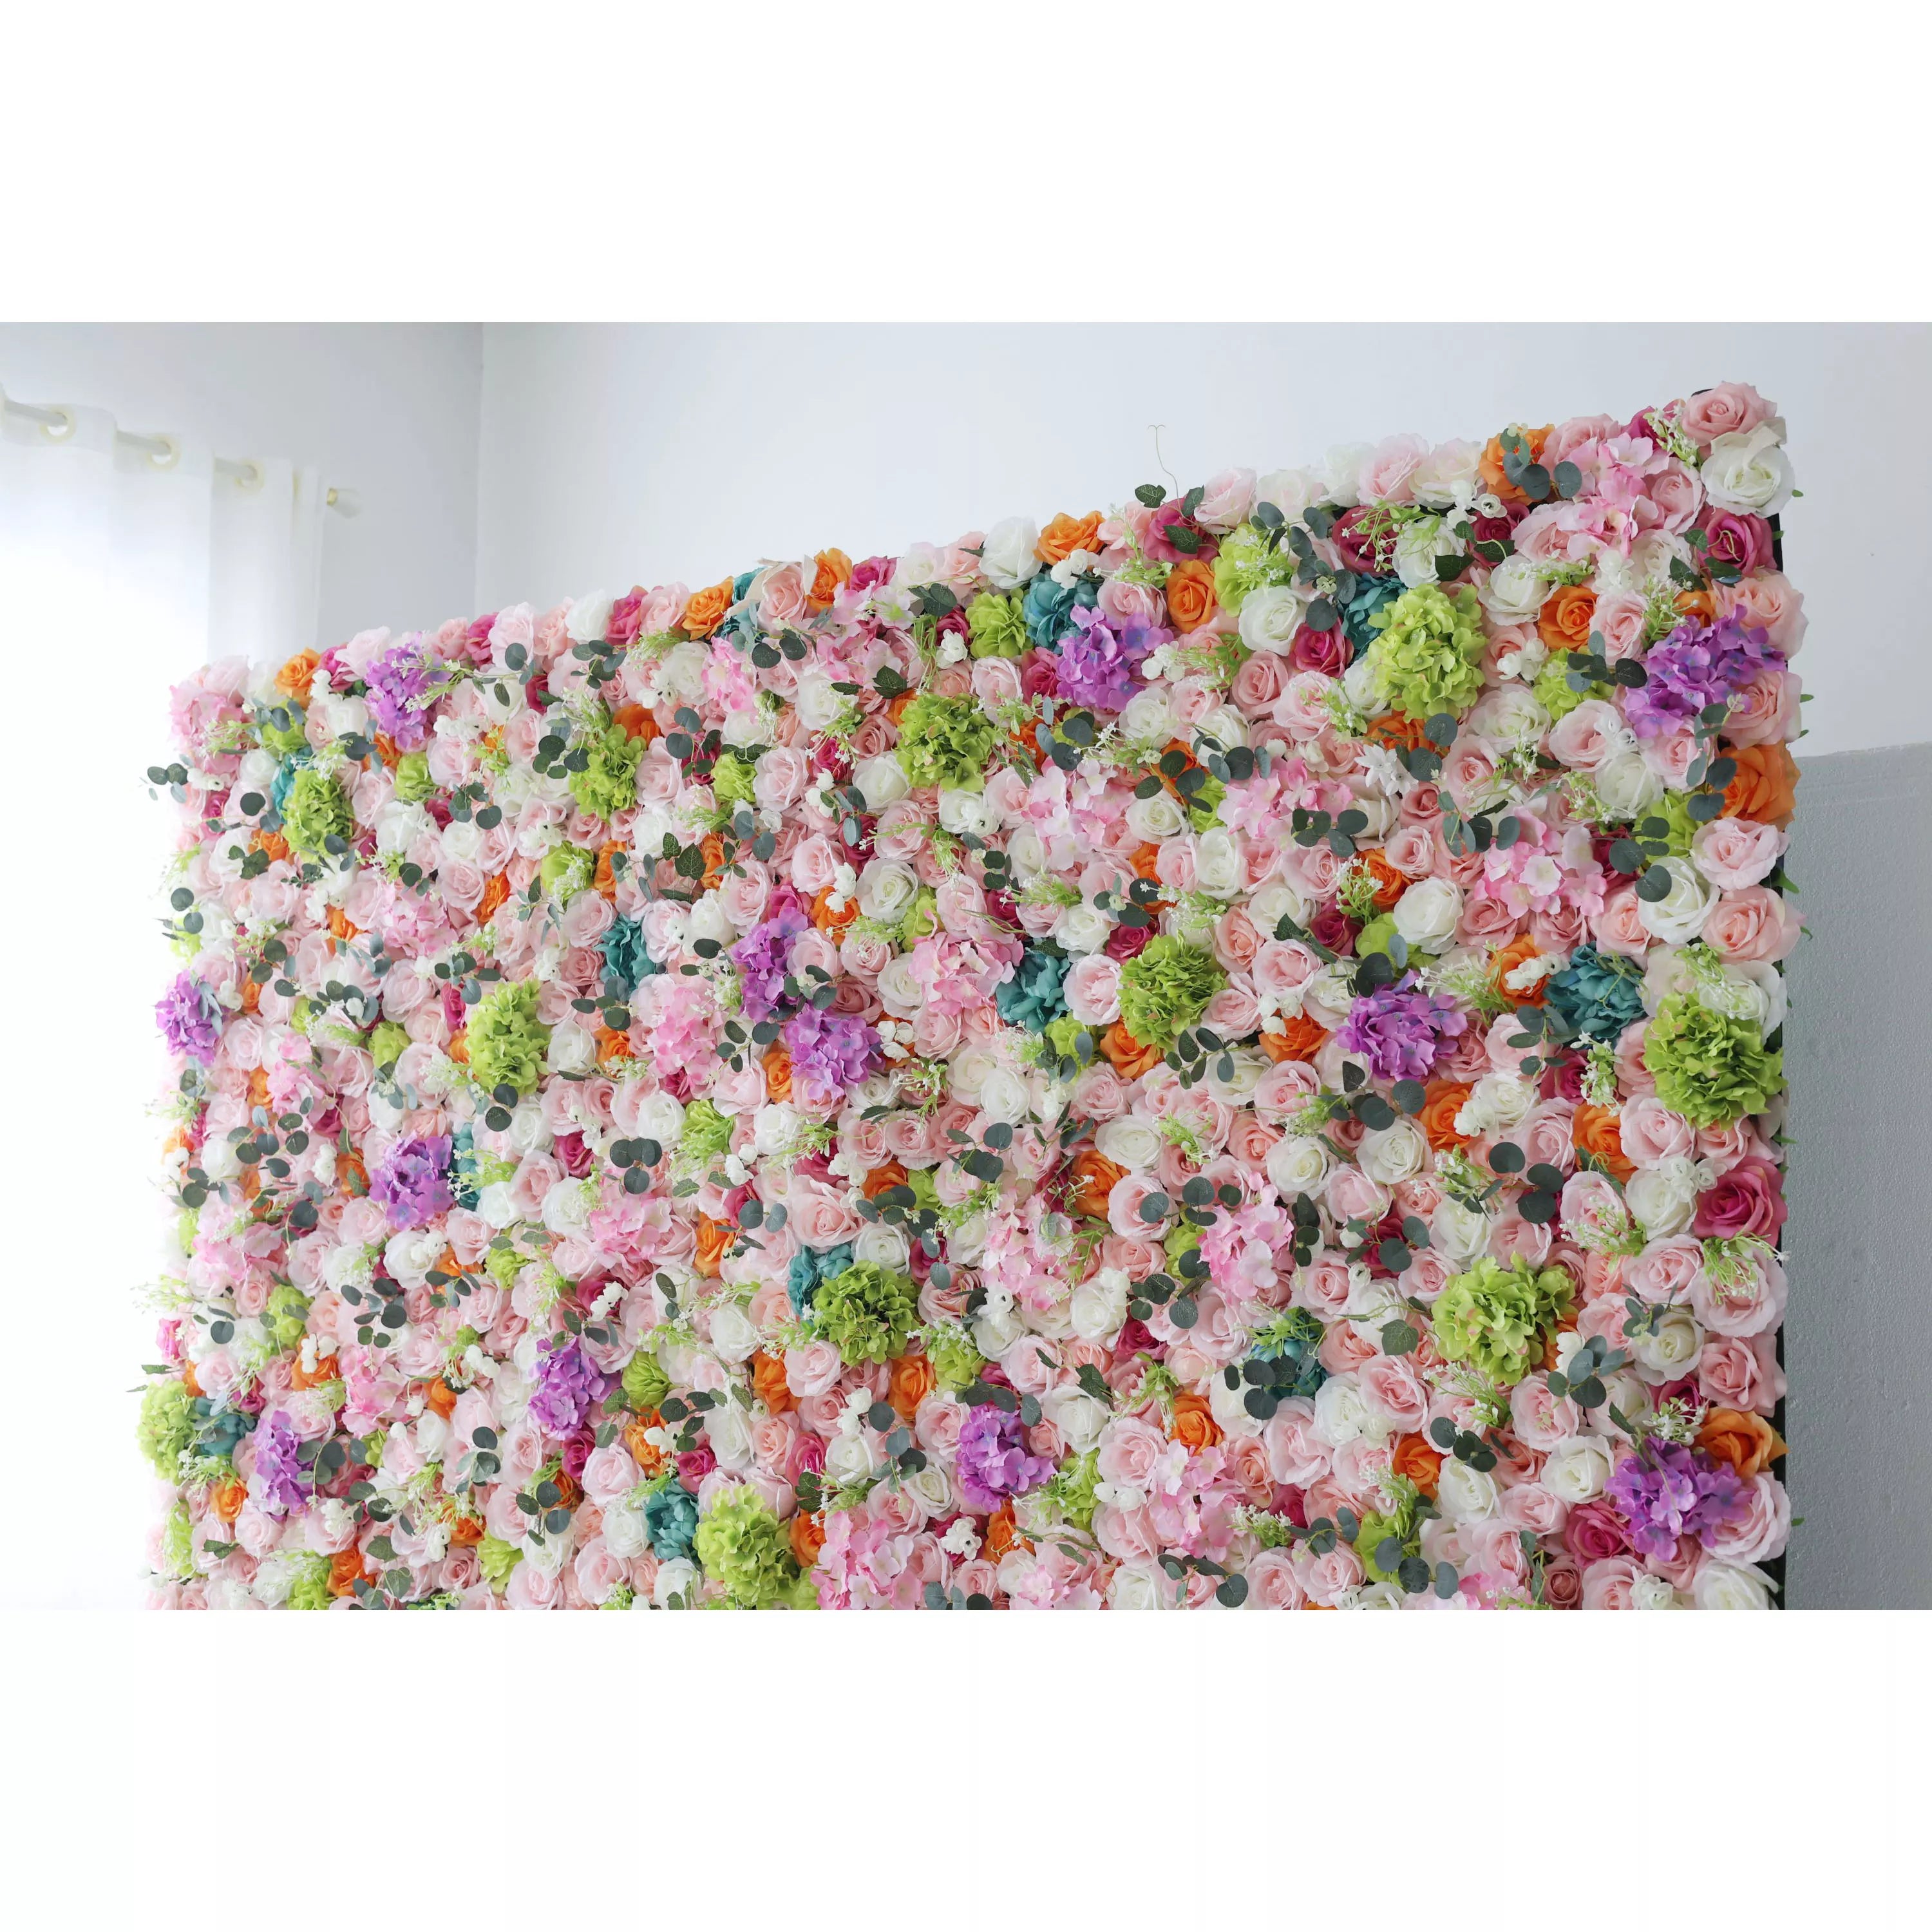 ValarFlowers Artificial Floral Wall Backdrop: Whimsical Garden Euphoria - A Dazzling Dance of Delightful Hues-VF-248